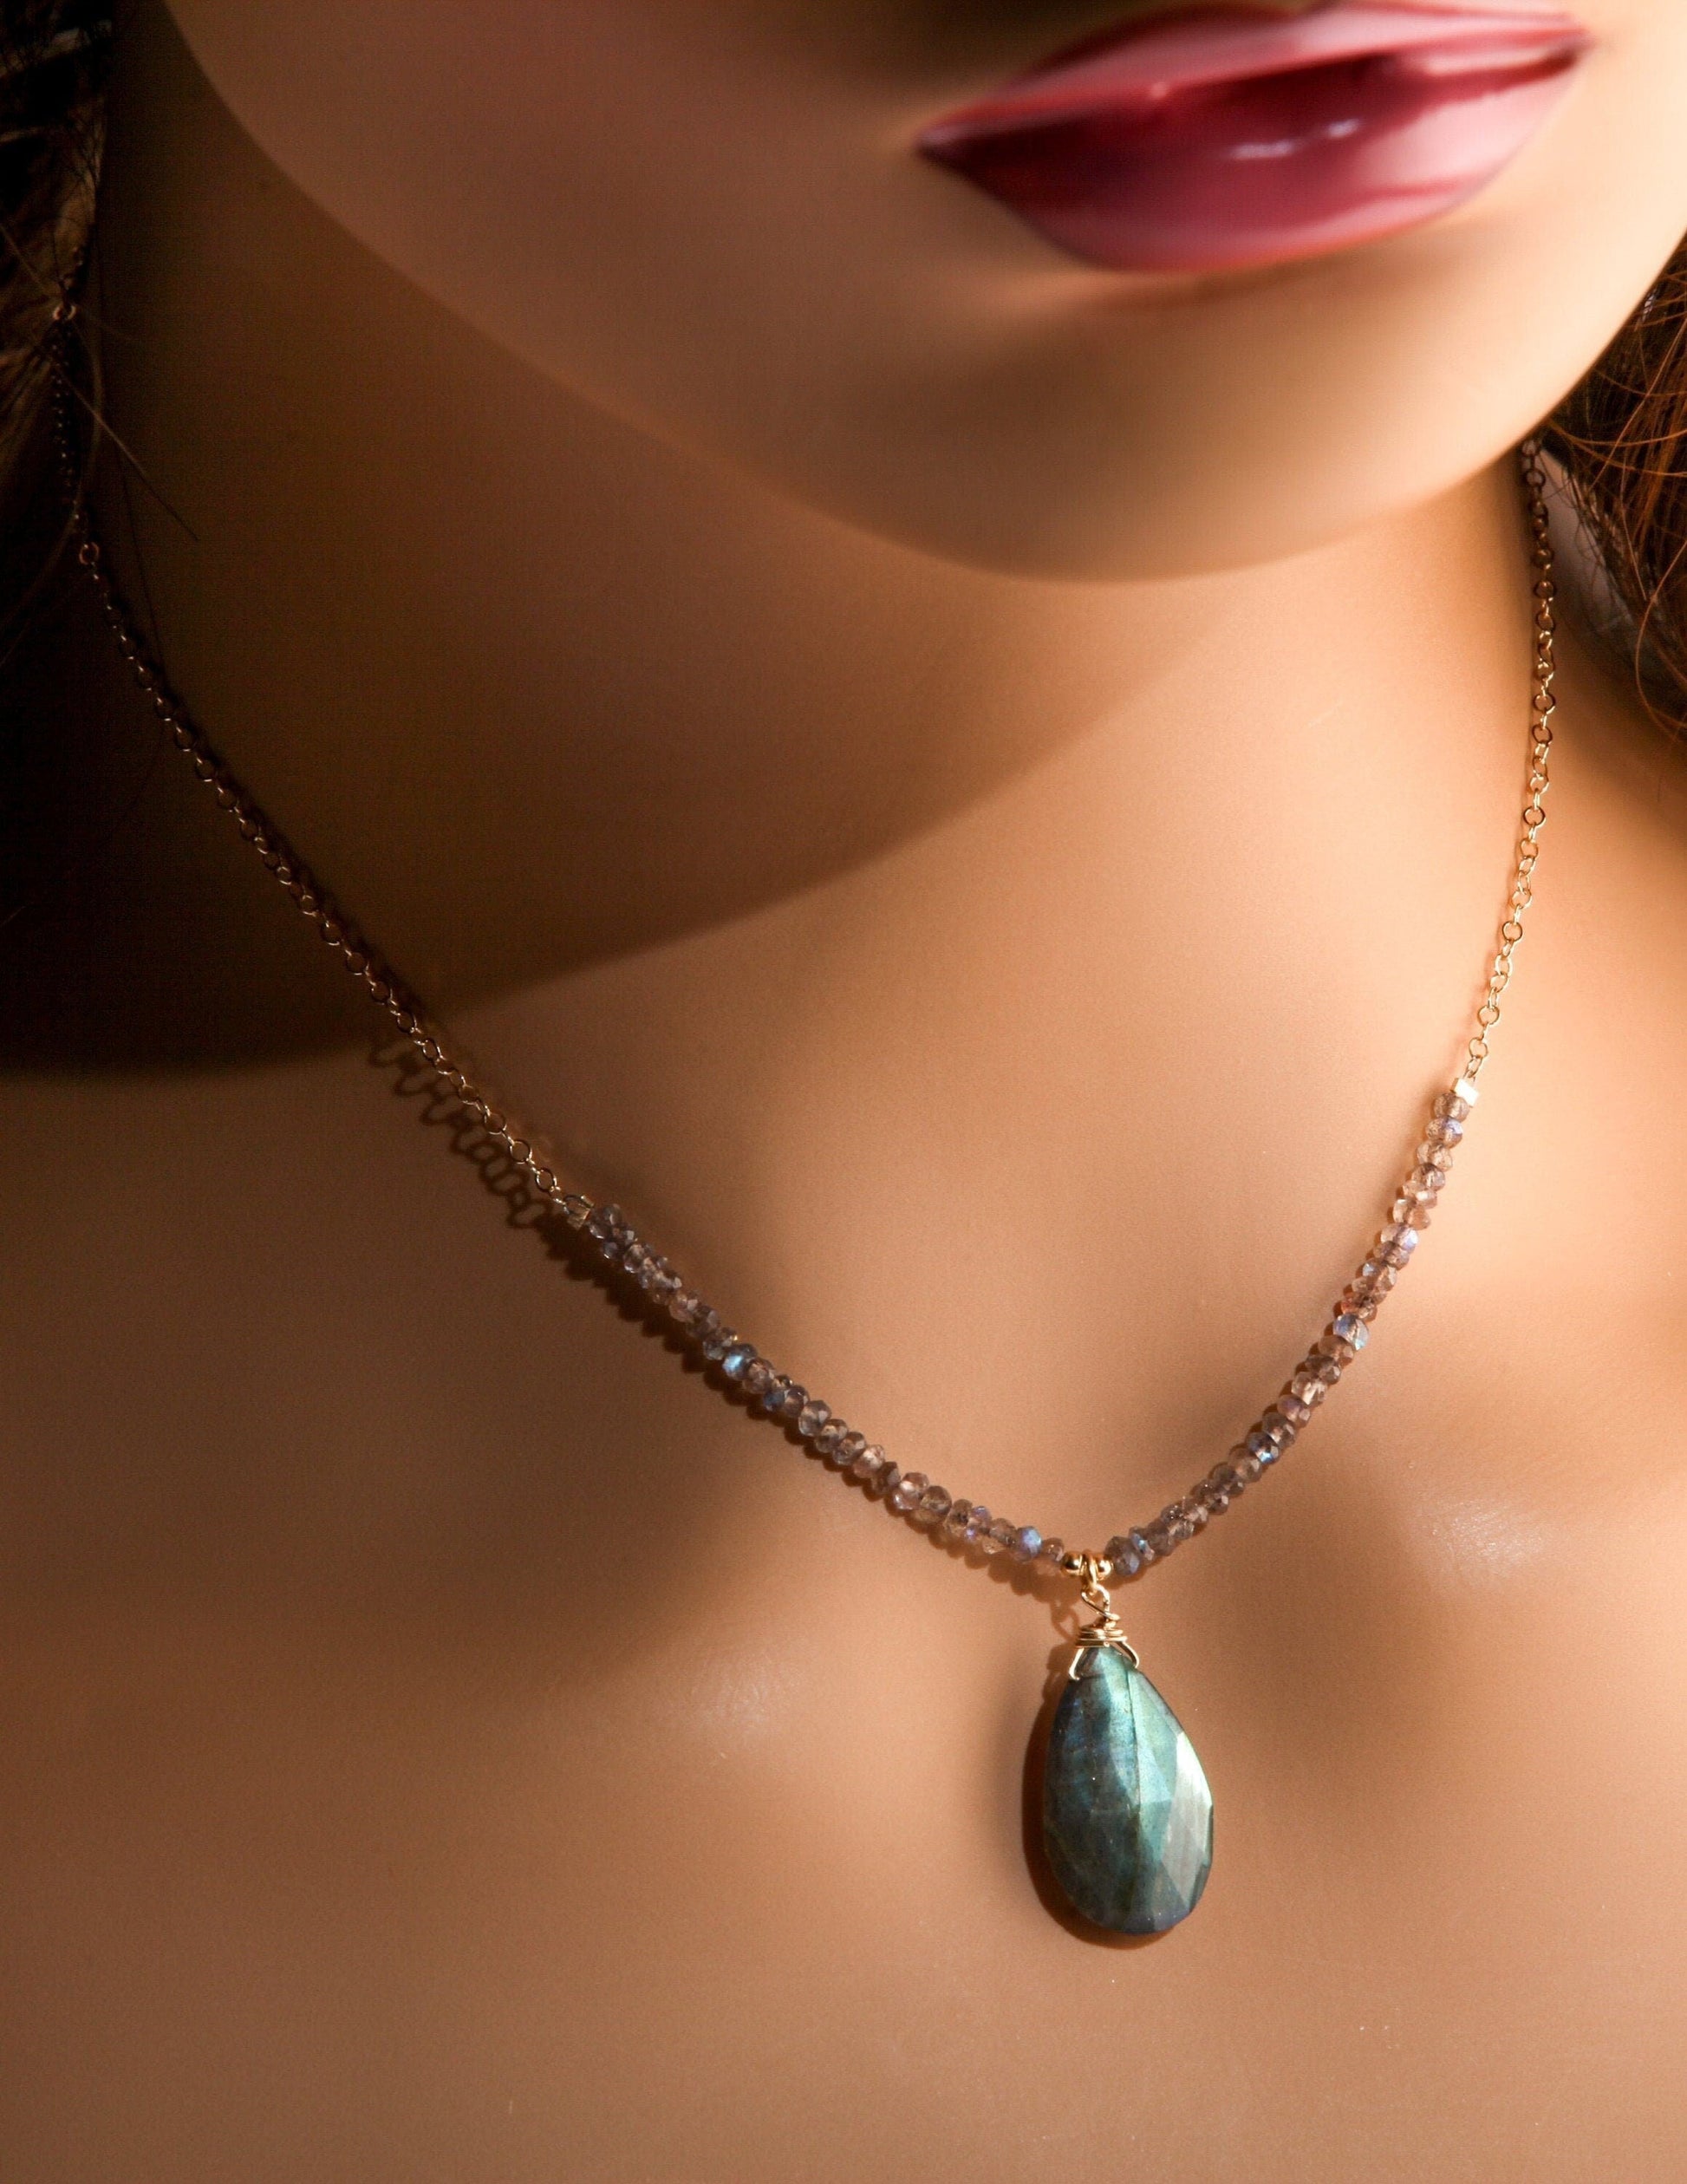 Labradorite Faceted 12x22mm large Pear Drop pendant with Labradorite Rondelle, 14K Gold Filled Chain Necklace, Clasp, handmade Gift For Her